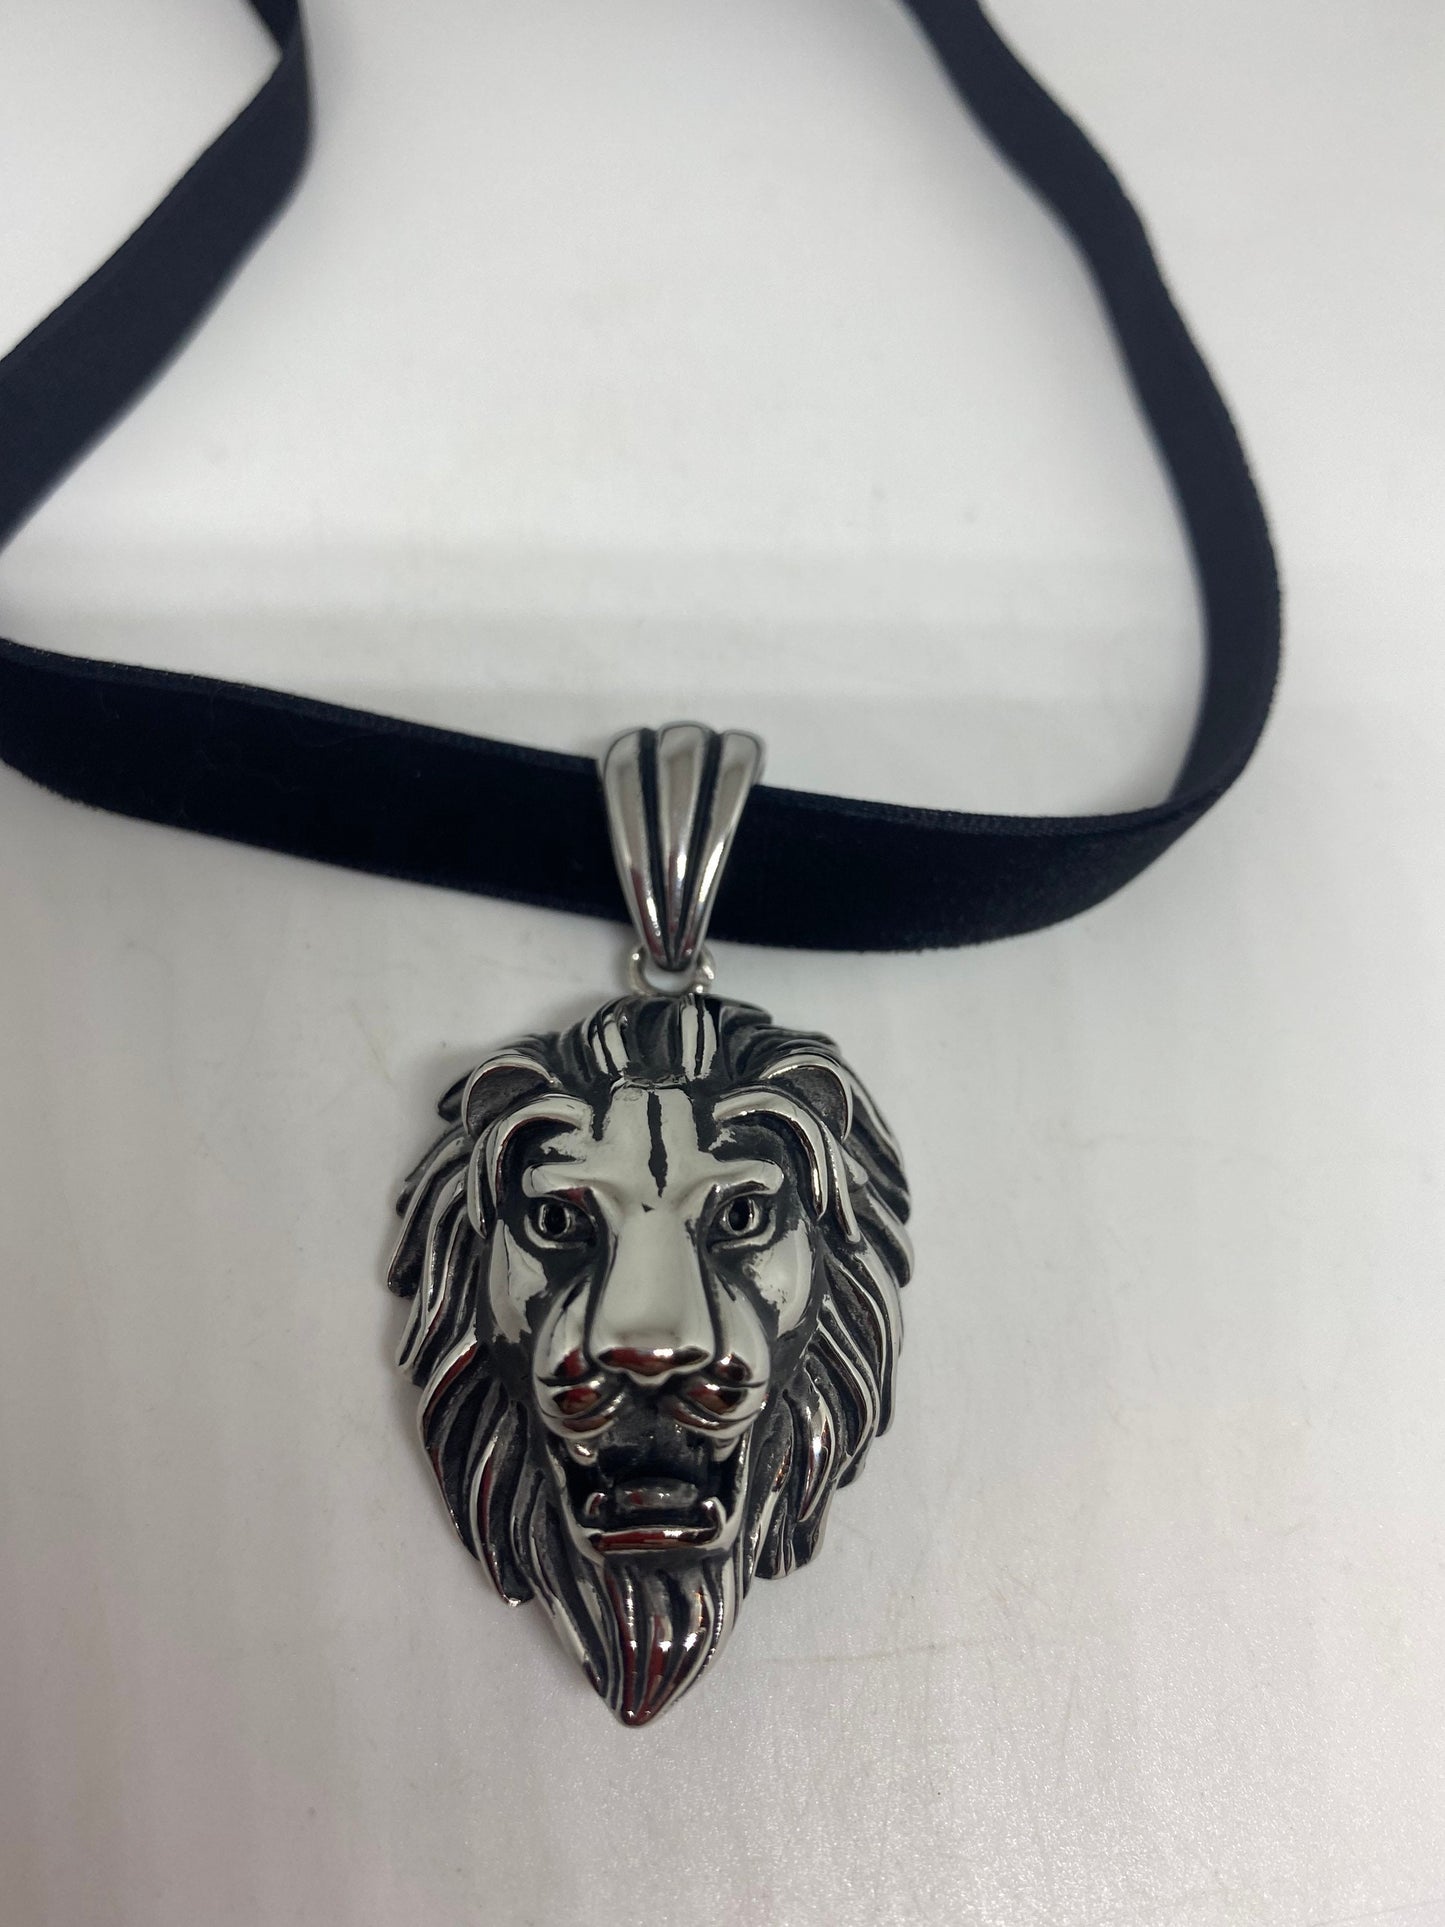 Vintage Handmade Silver Stainless Steel Gothic Lion Pendant Necklace